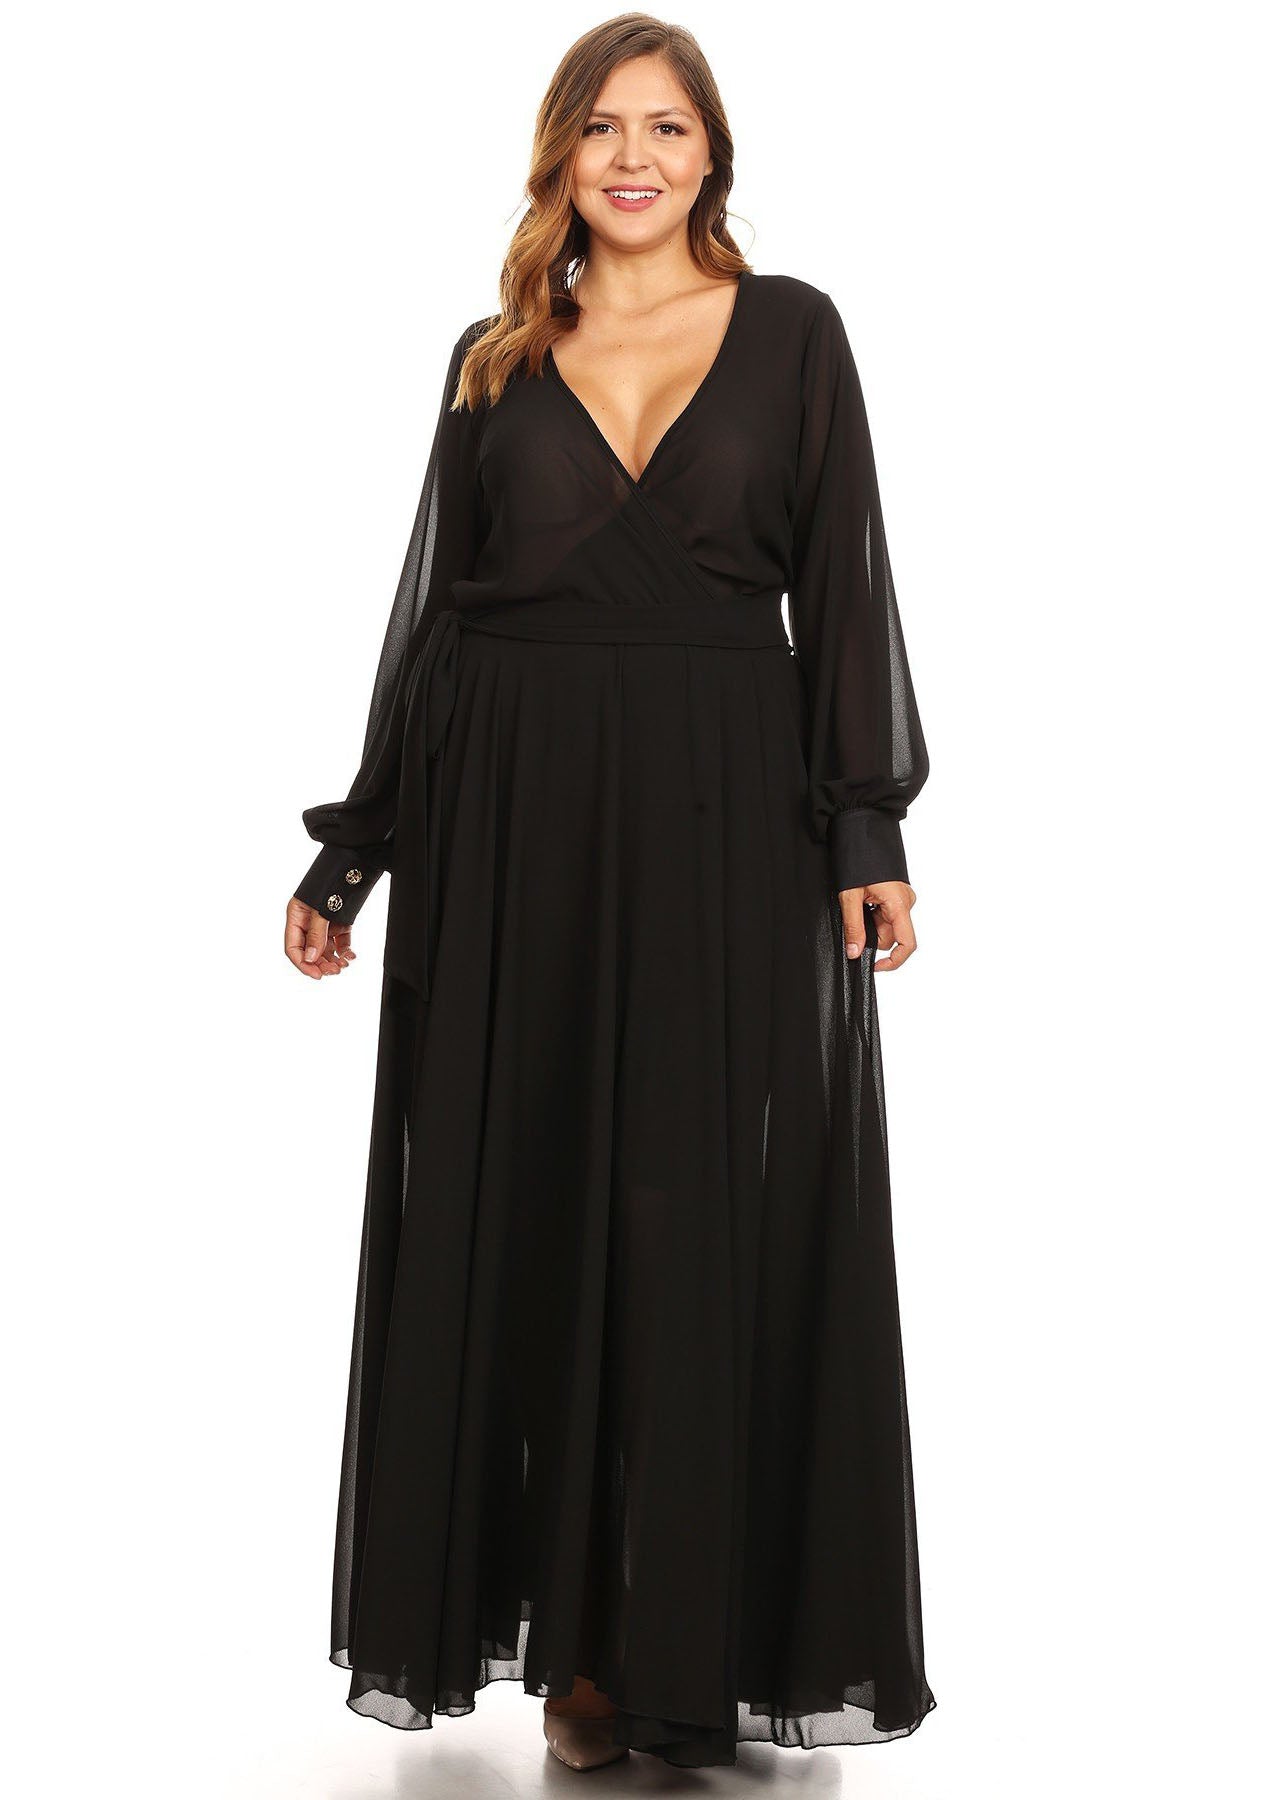 Hi Curvy Plus Size Women Solid Wrap Maxi Dress Made in USA